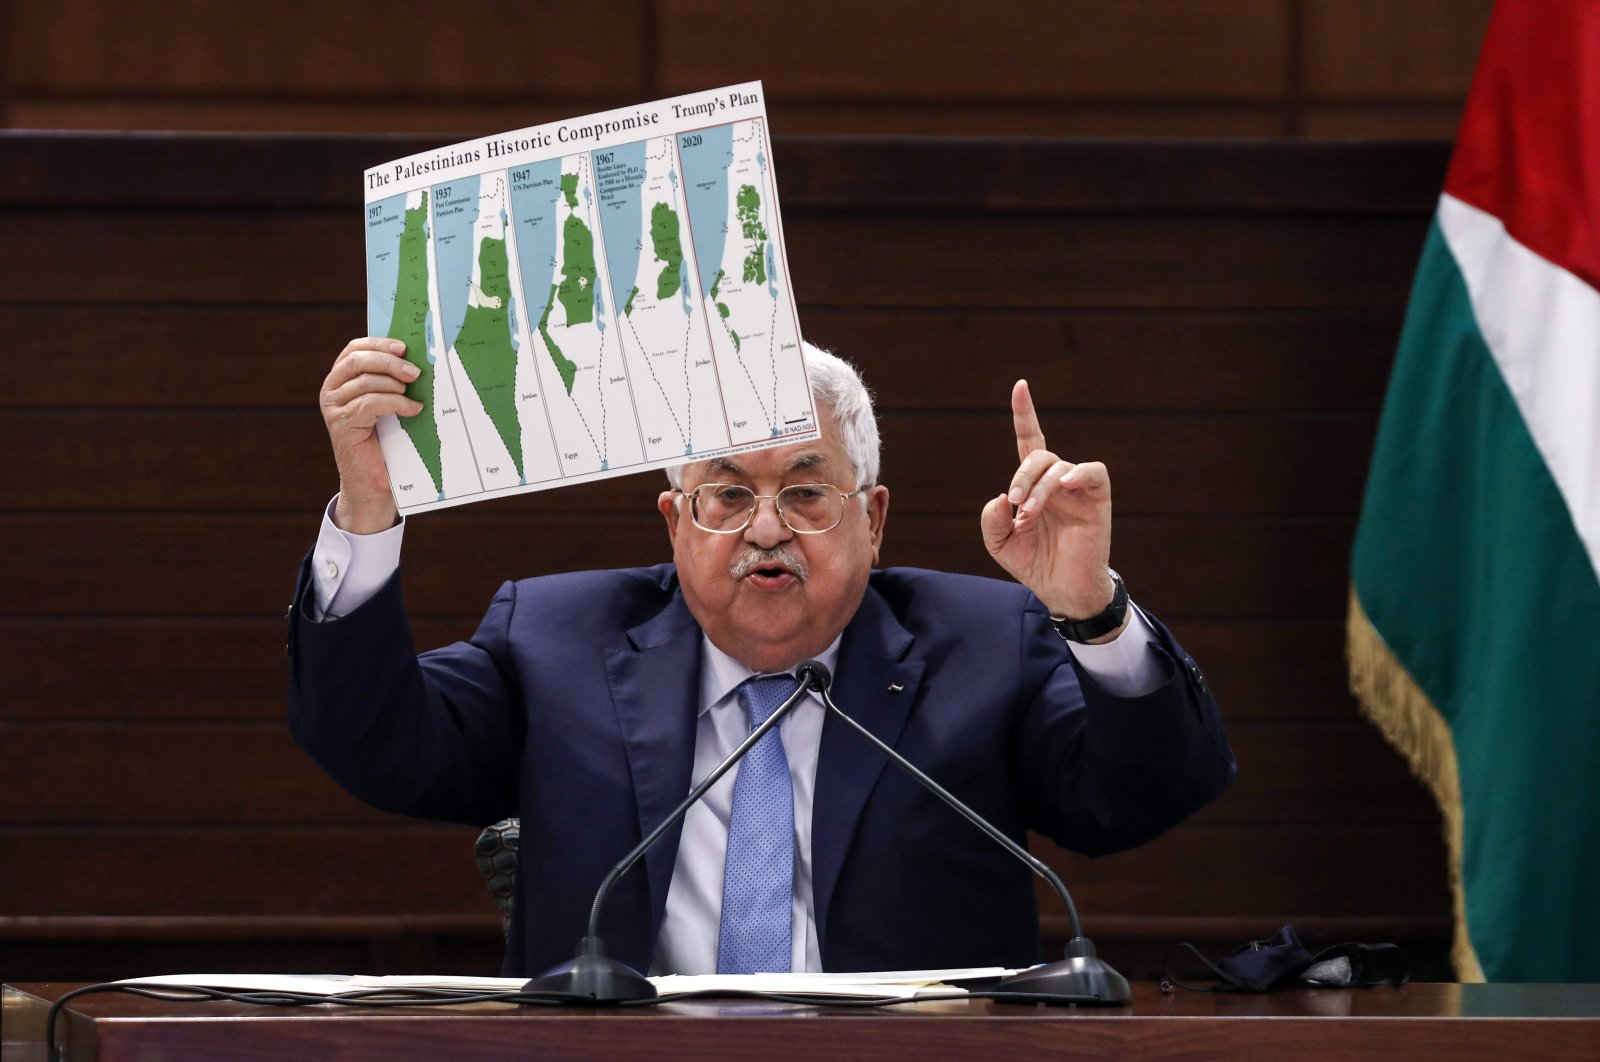 Palestinian president Mahmud Abbas holds a placard showing maps of (L to R) historical Palestine, the 1947 United Nations partition plan on Palestine, the 1948-1967 borders between the Palestinian territories and Israel, and a map of U.S. President Donald Trump's proposal for a Palestinian state under his so-called peace plan, as he speaks in the West Bank's Ramallah, Sept. 3, 2020. (AFP)